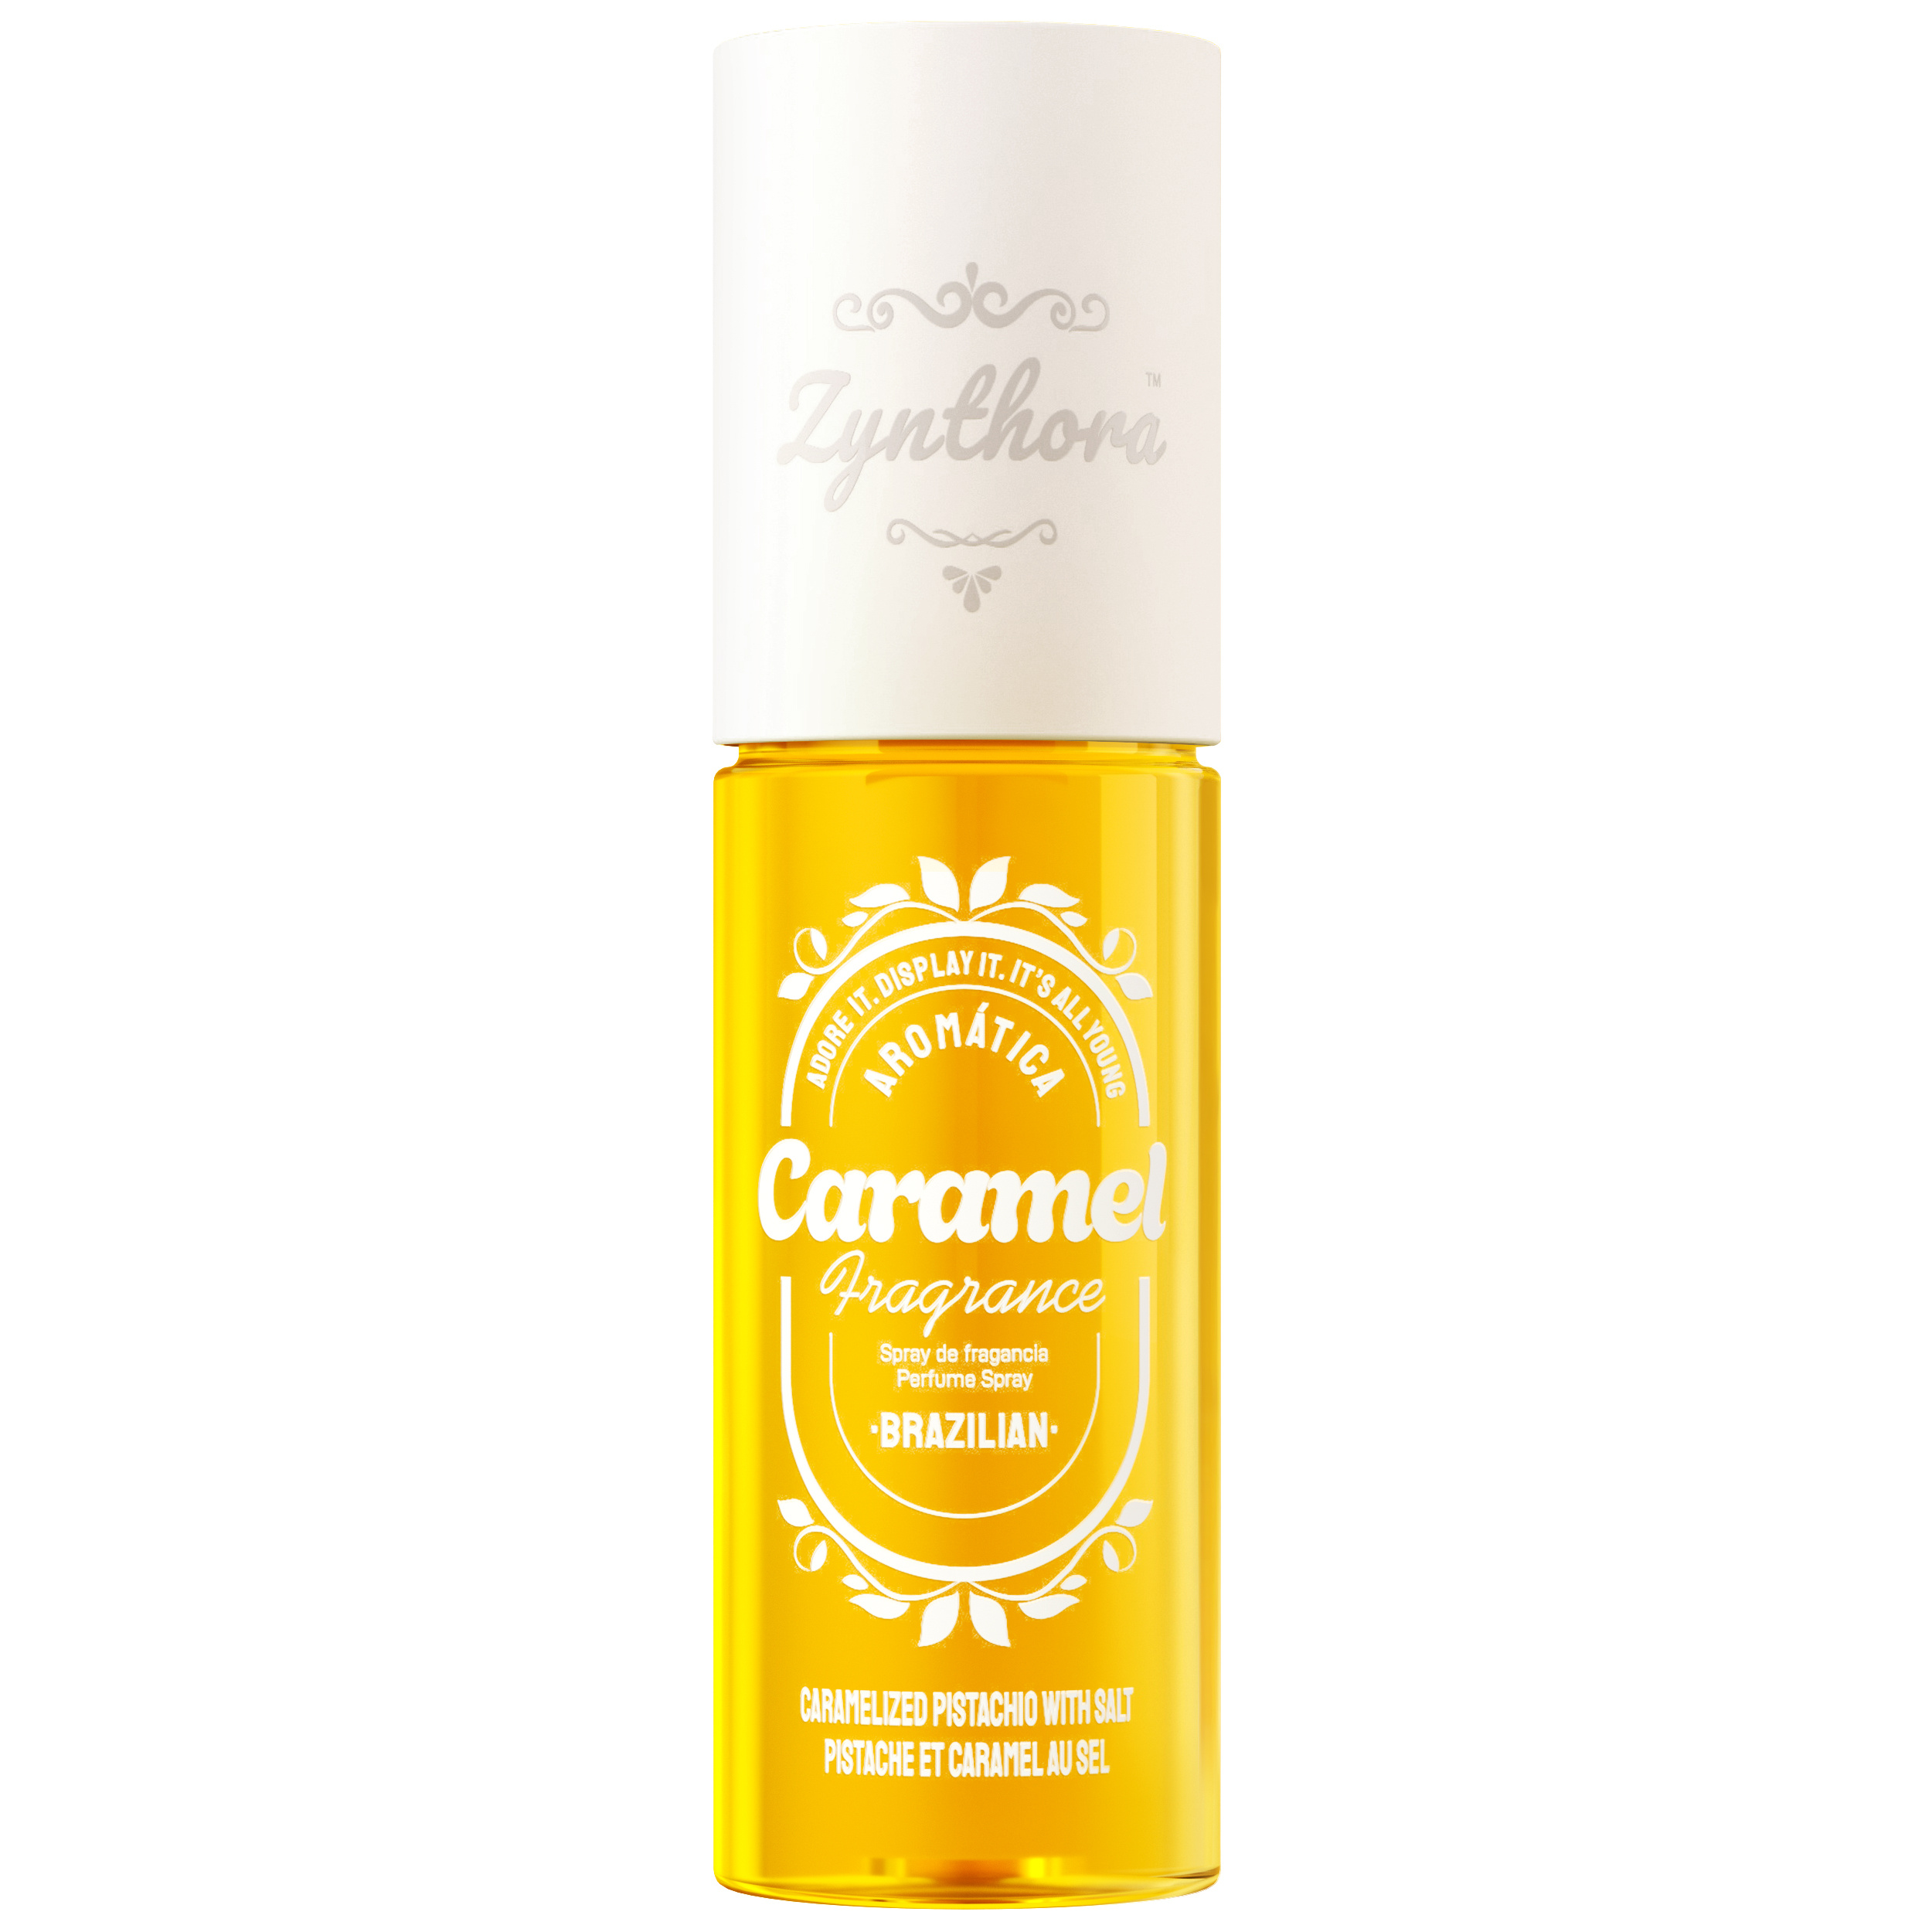 

100ml Hair & Body Fragrance Mist, Infused With Nutty, Briny Caramel, And Heliotrope, Is A Warm Gourmand Fragrance Spritz It From Head To Toe Anytime, Anywhere, For A Long-lasting, Charming Scent